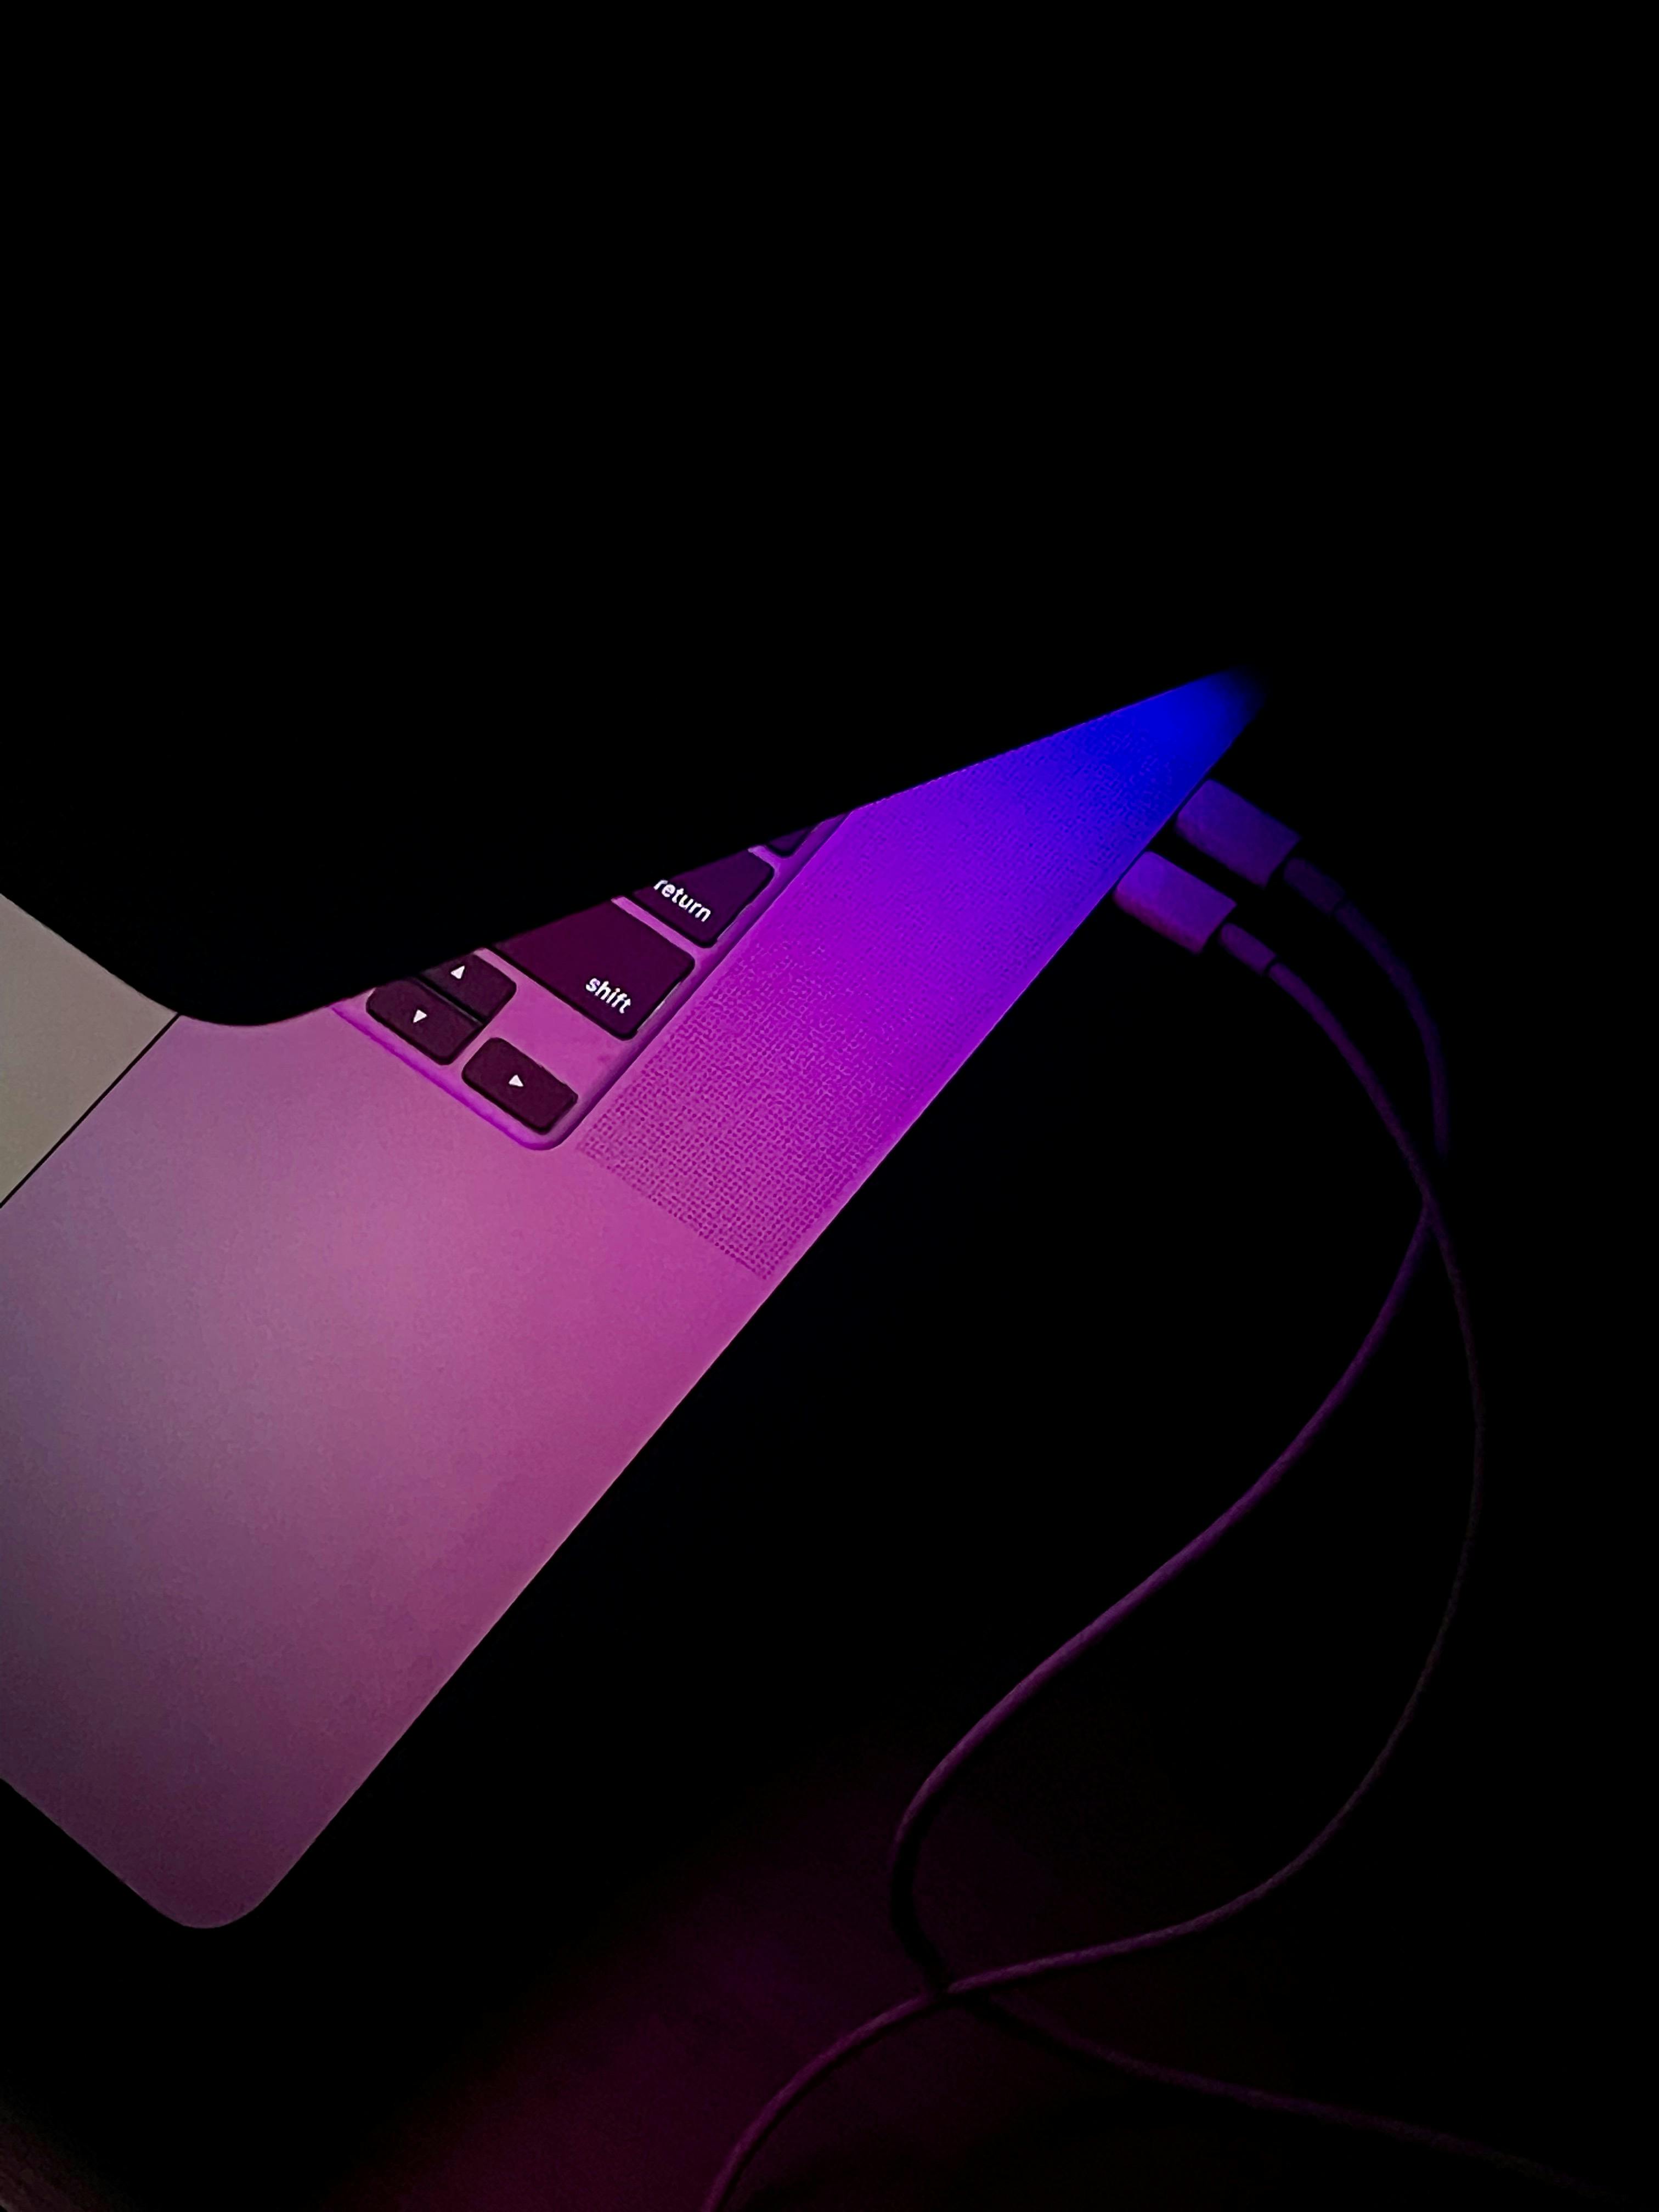 A half-open MacBook Pro in the dark, emitting blue and purple light from the screen